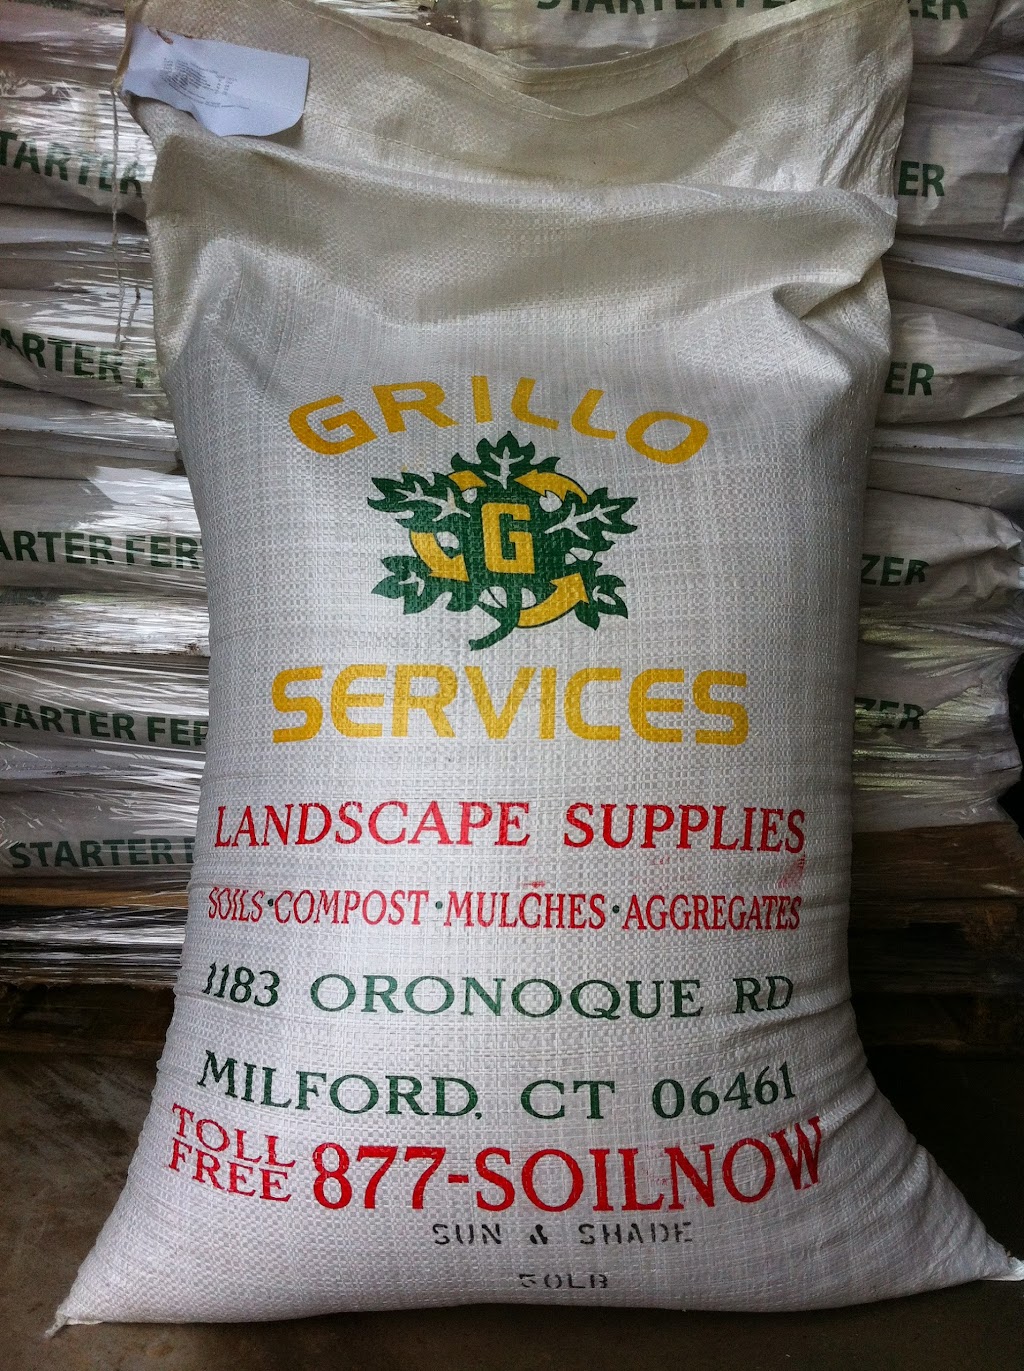 Grillo Services | 1183 Oronoque Rd, Milford, CT 06460 | Phone: (203) 877-5070